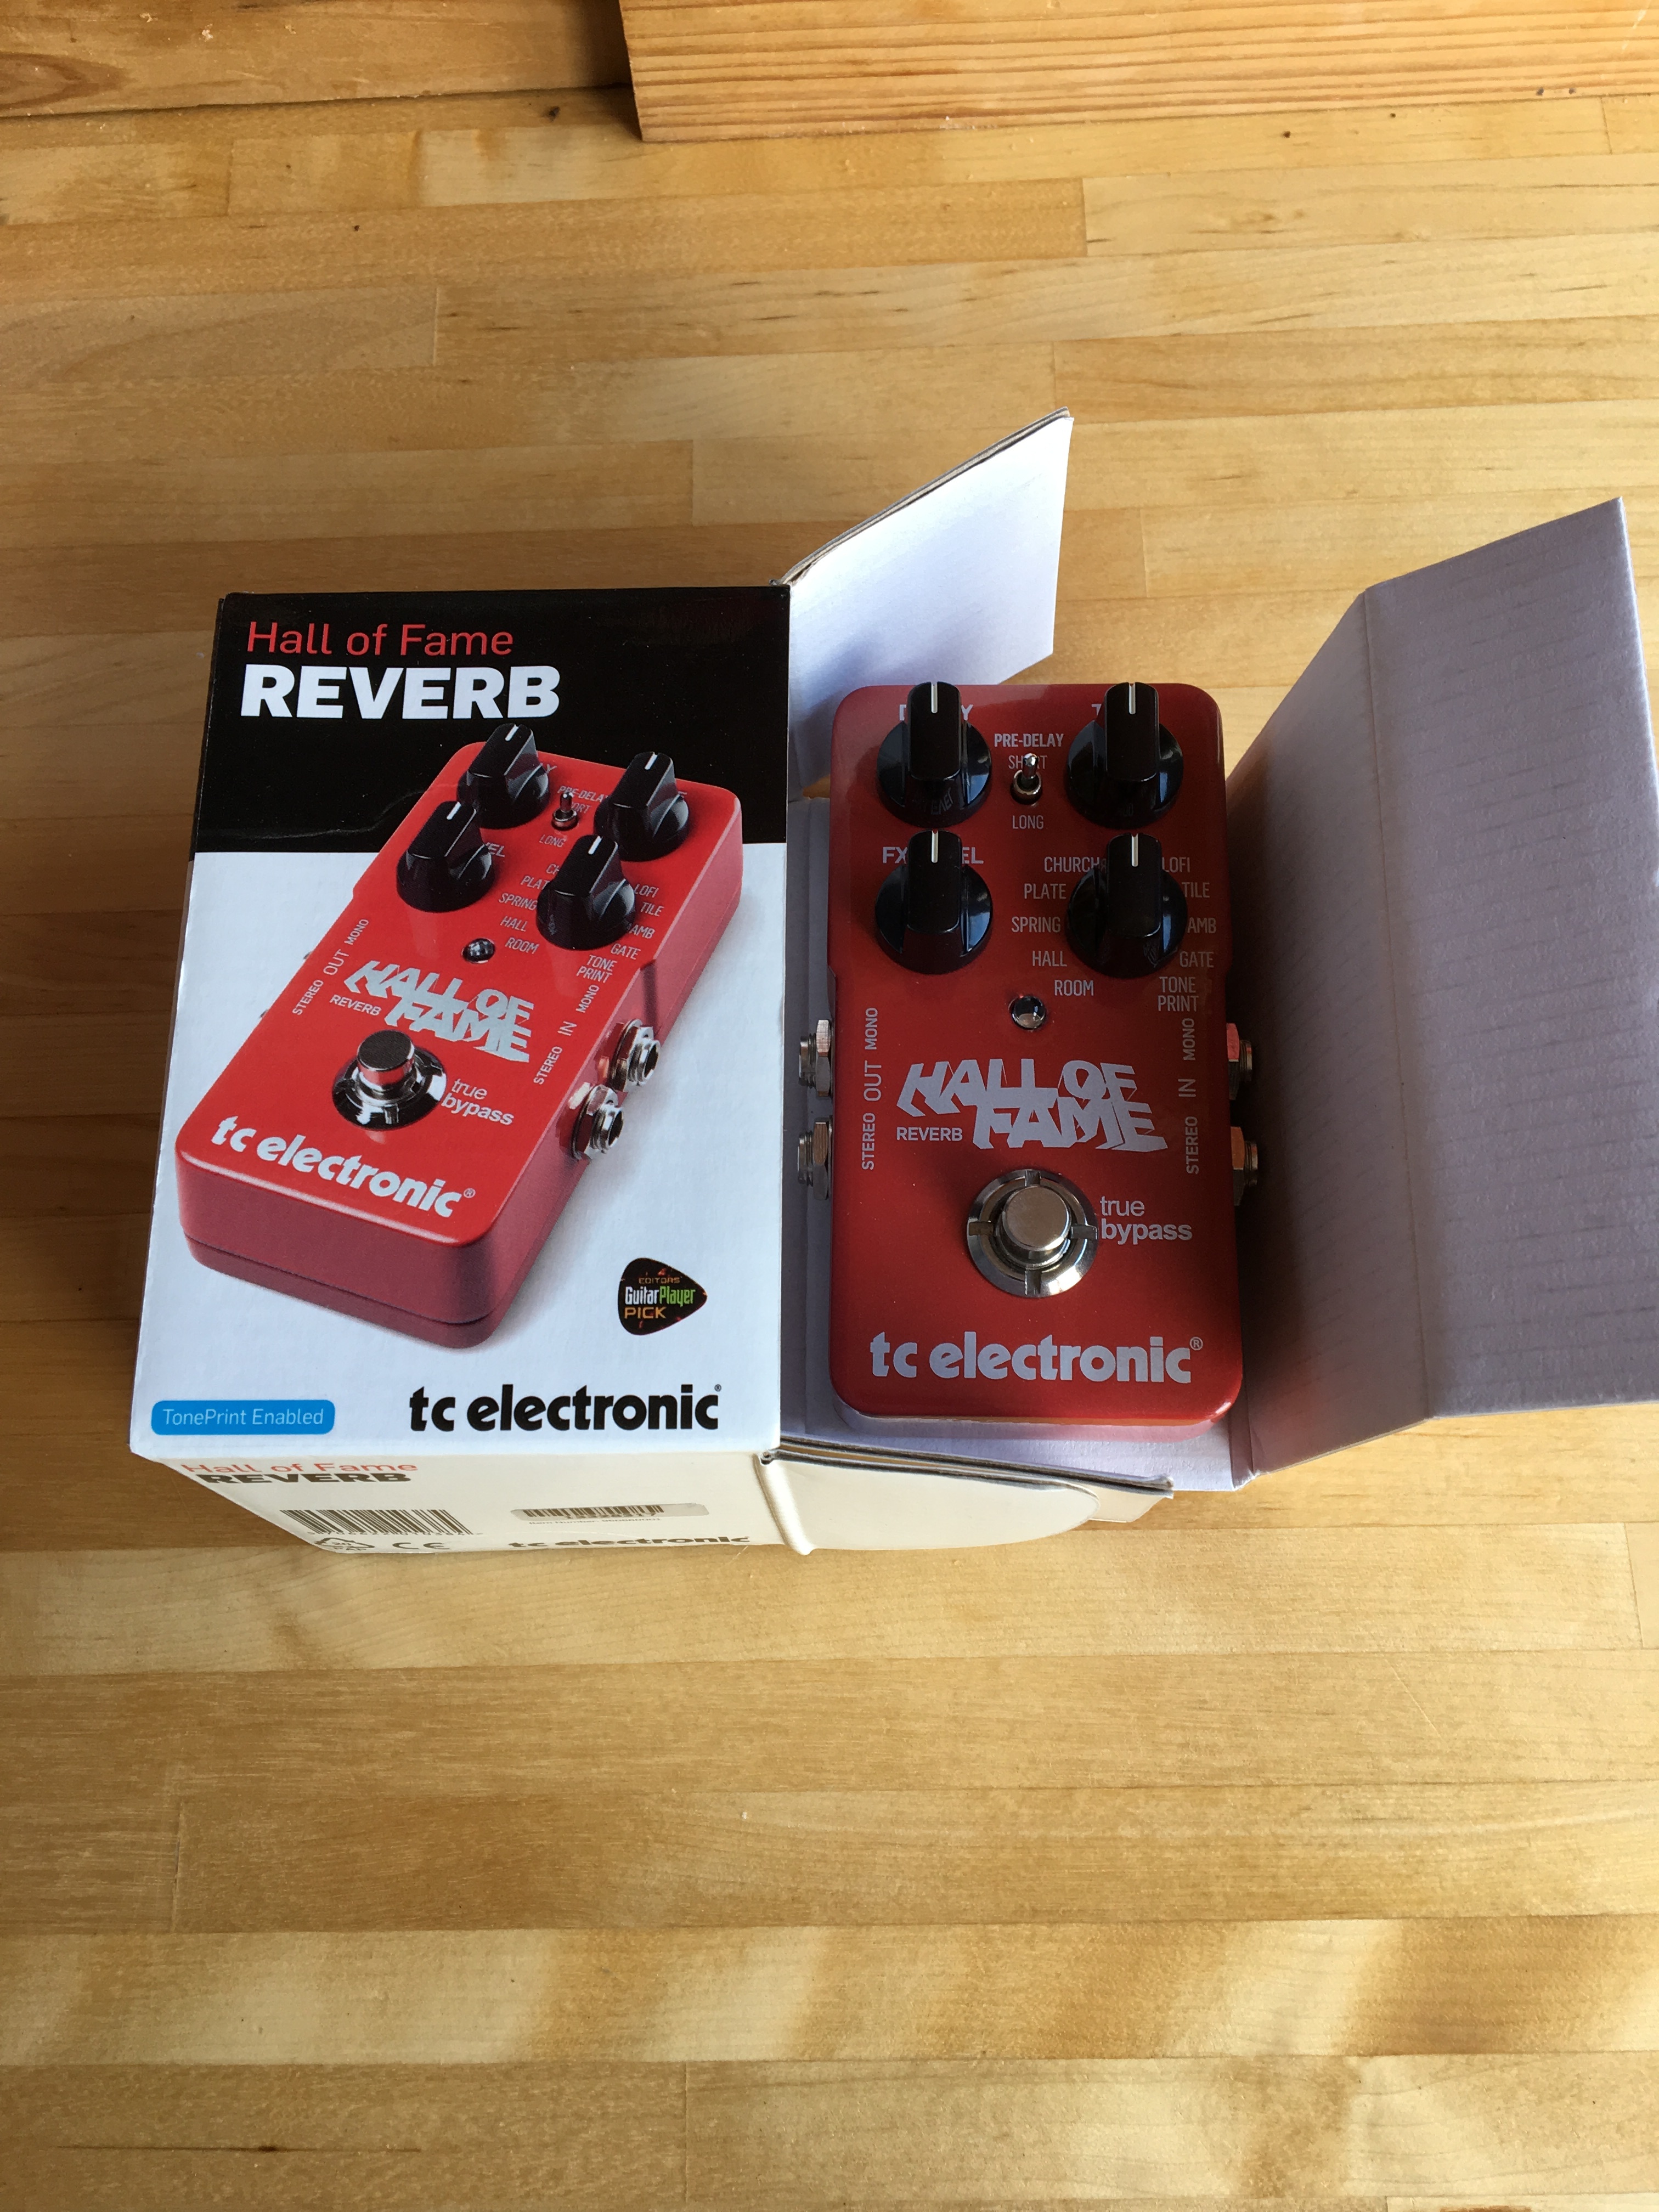 HALL OF FAME REVERB - TC Electronic Hall of Fame Reverb - Audiofanzine